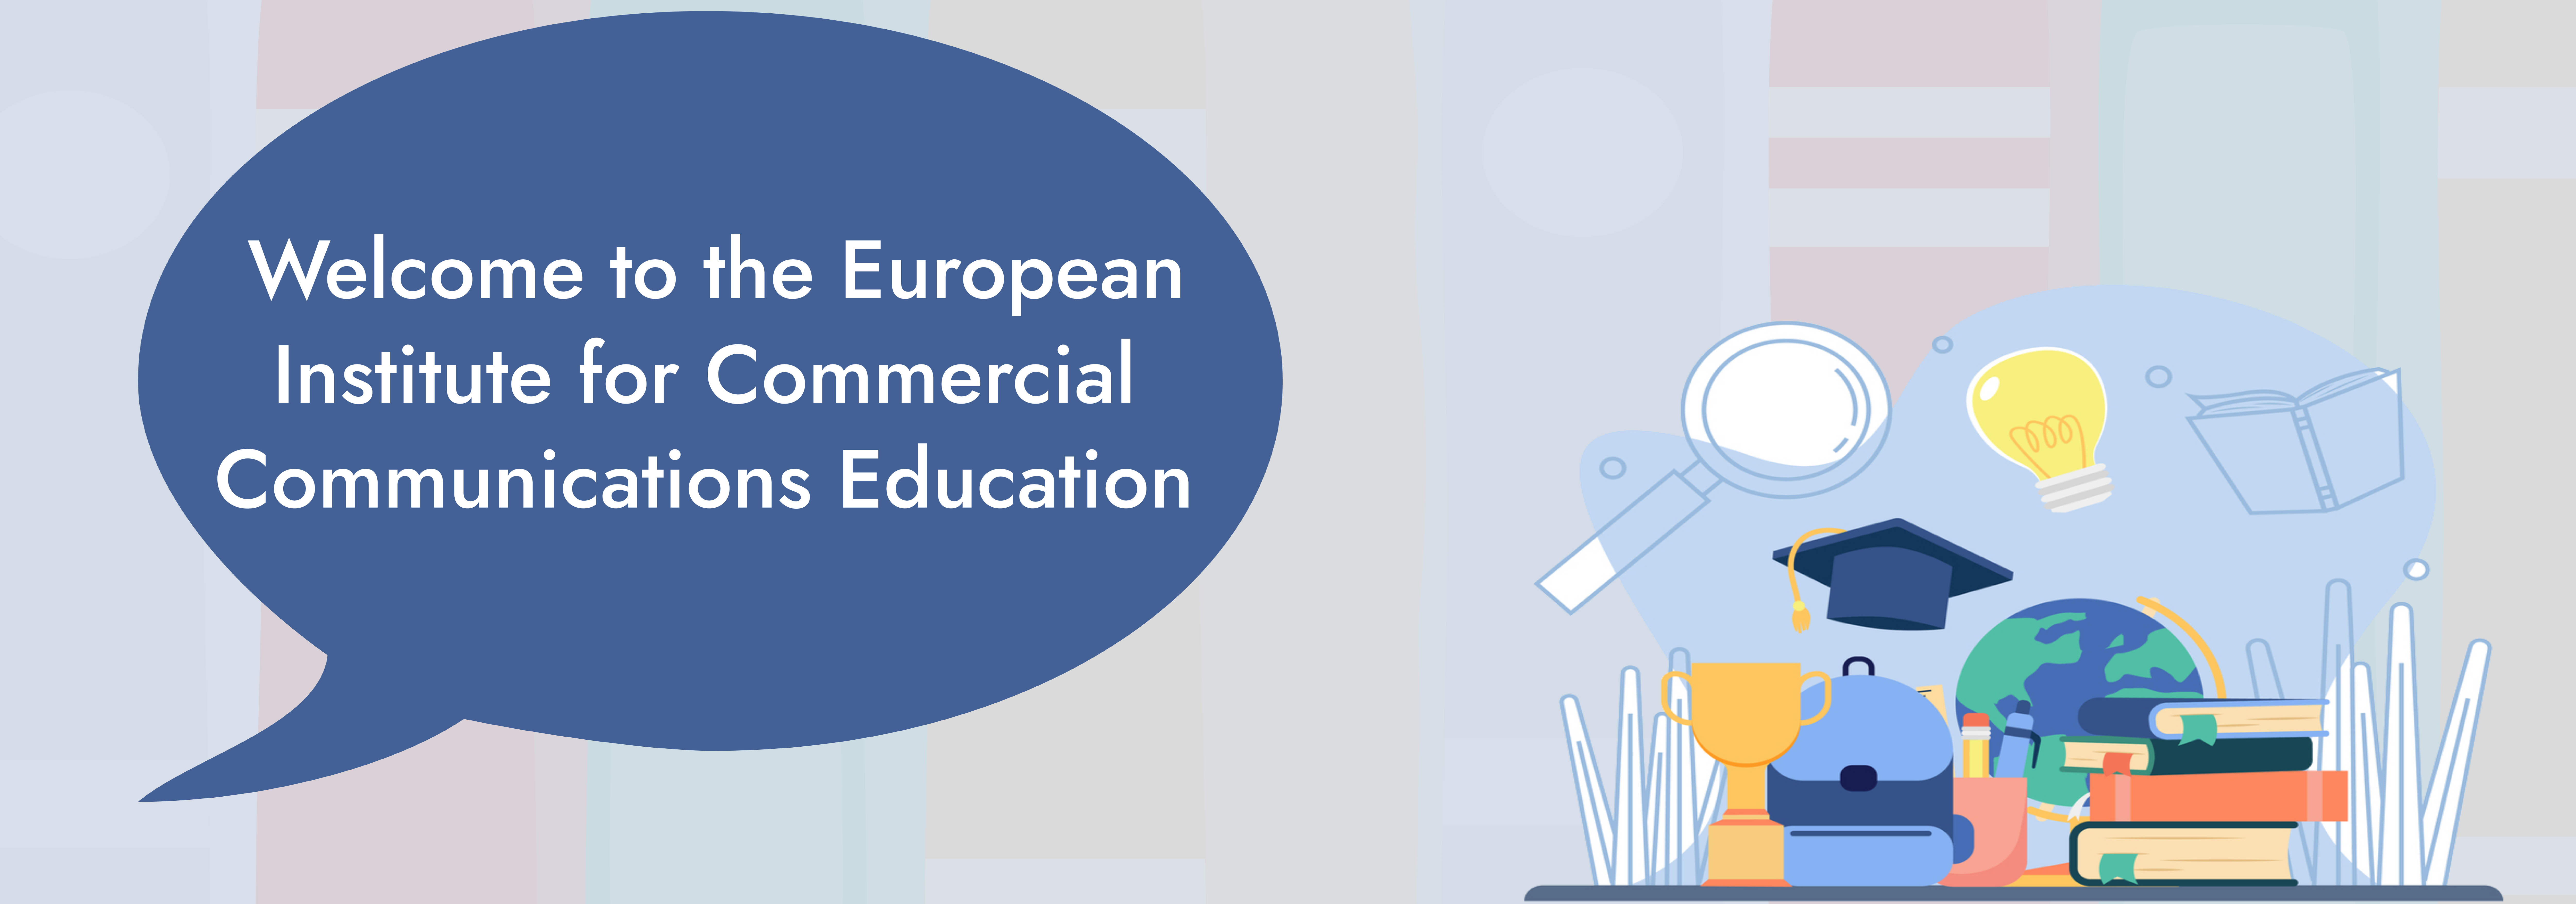 Welcome to edcom, the European Institute for Commercial Communications Education (1)